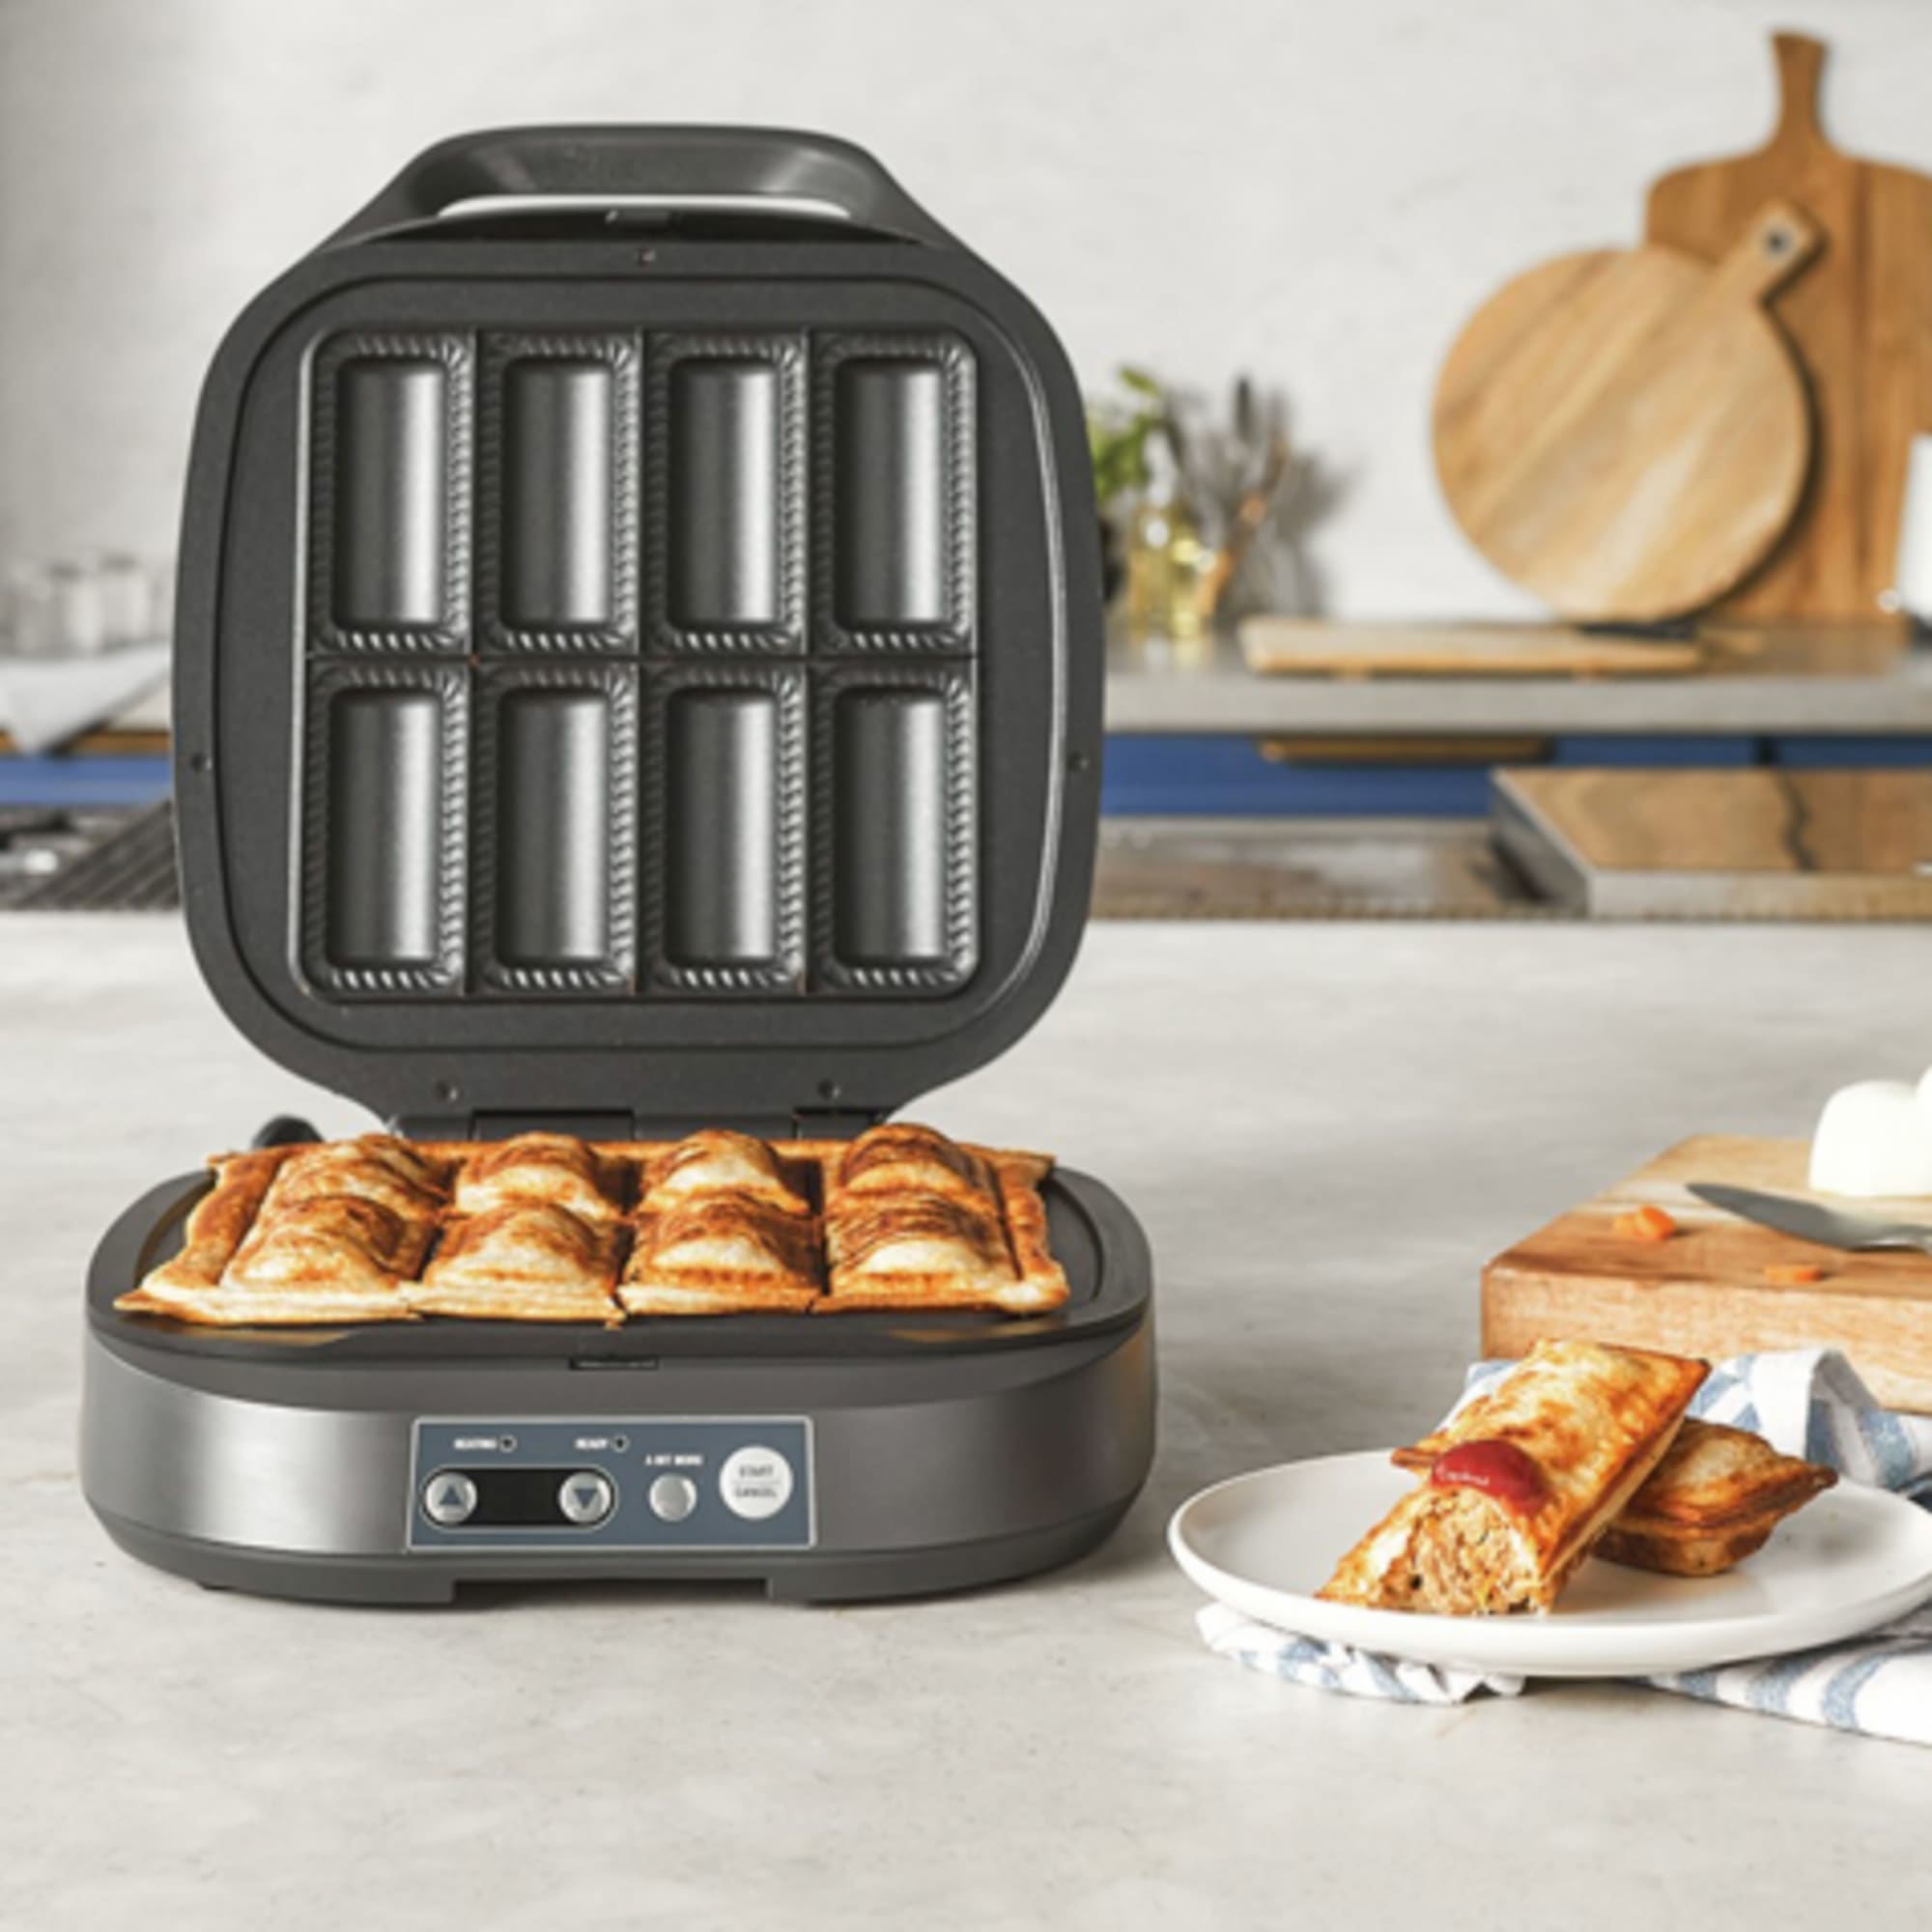 https://res.cloudinary.com/kitchenwarehouse/image/upload/c_fill,g_face,w_475/f_auto/t_PDP_2000x2000/Supplier%20Images%20/2000px/Breville-the-Quick-and-Easy-Pie-Maker_3_2000px.jpg?imagetype=pdp_thumbnail